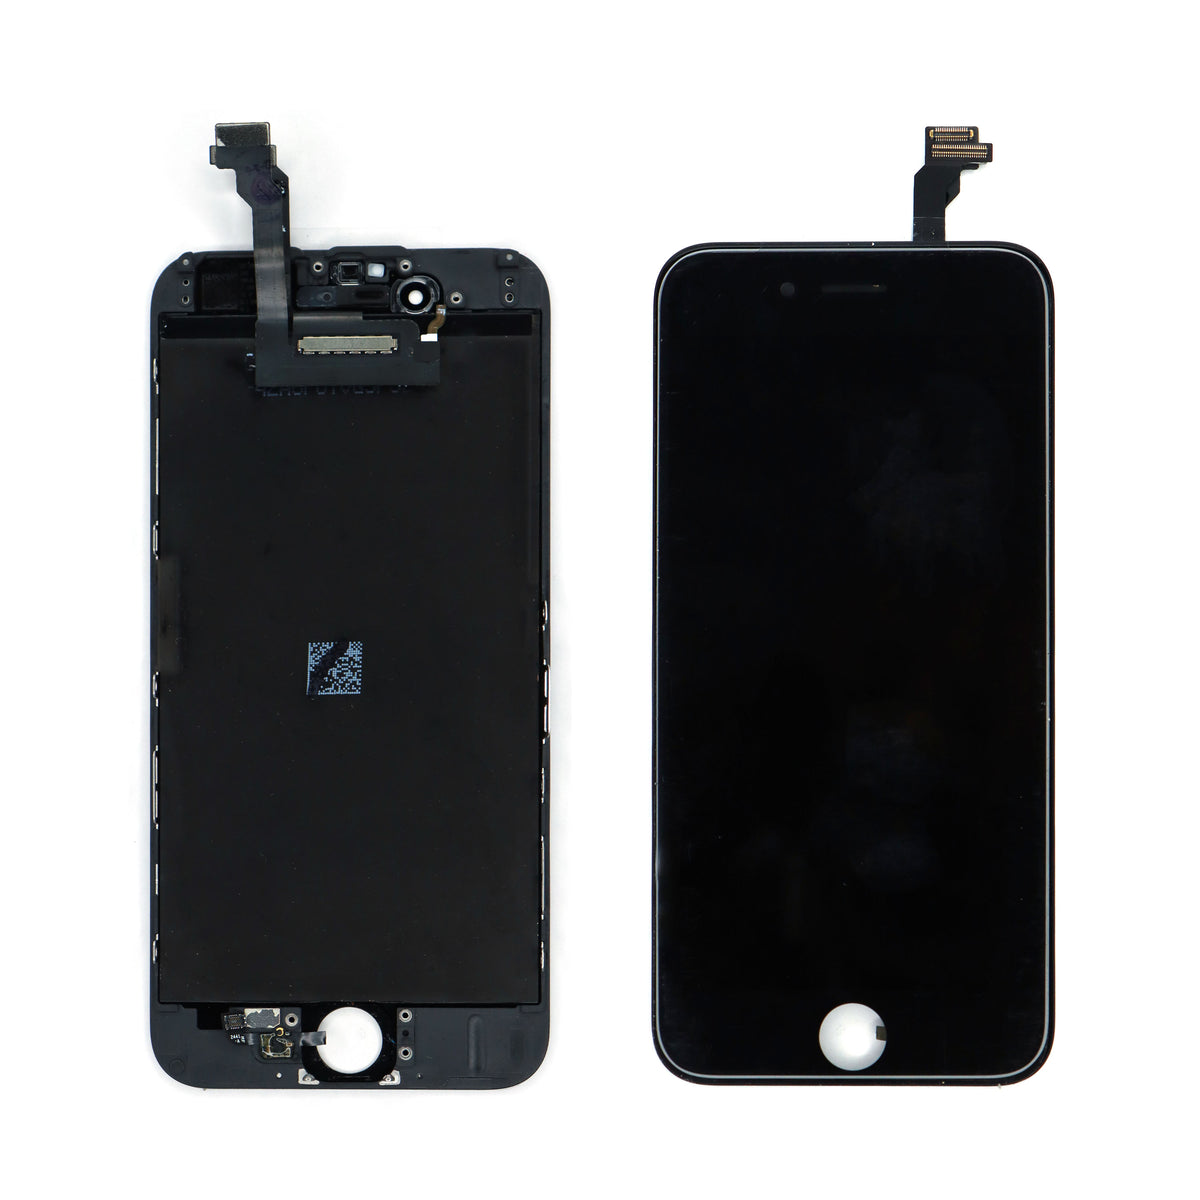 CARE OG MOBILE DISPLAY FOR IPHONE 6